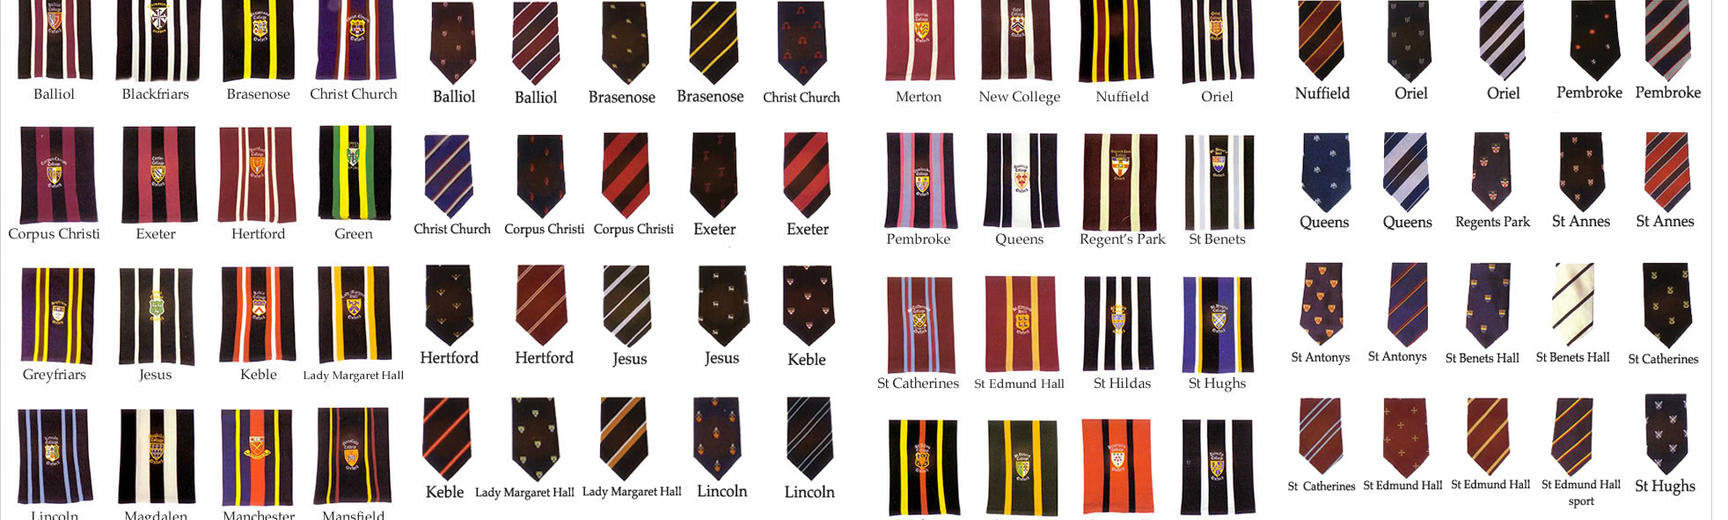 A montage of college scarves and ties available from Walters of Oxford